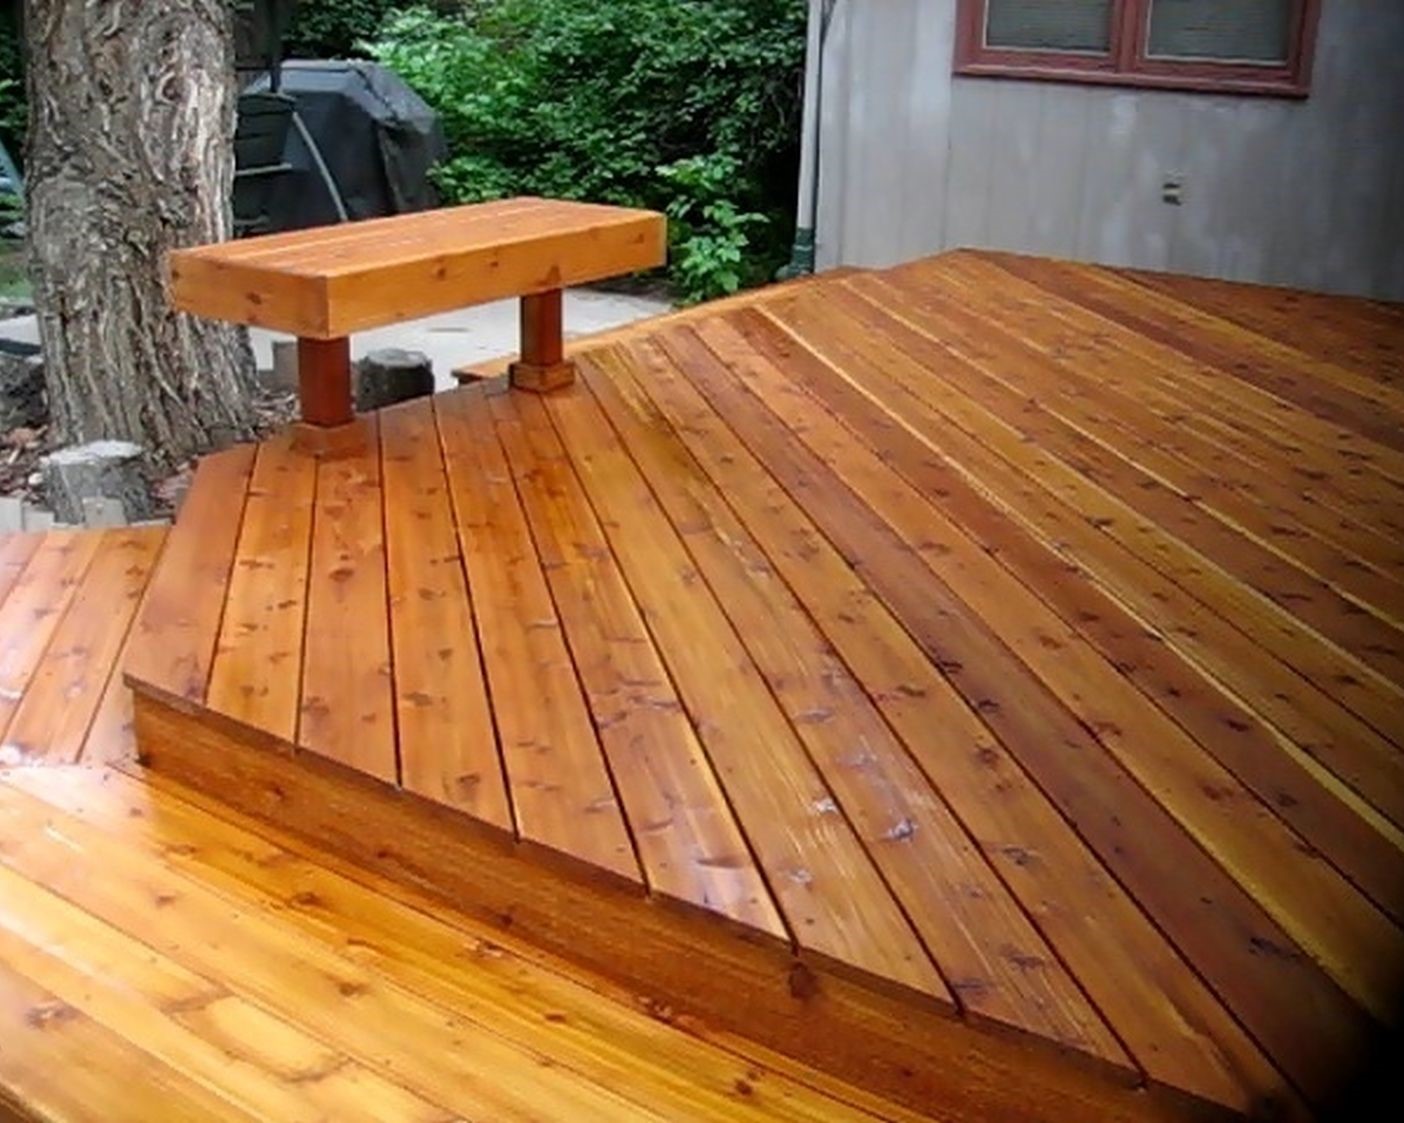 Cedar deck with the boards laid at a 45-degree angle and a single, wide step that encircles the deck.